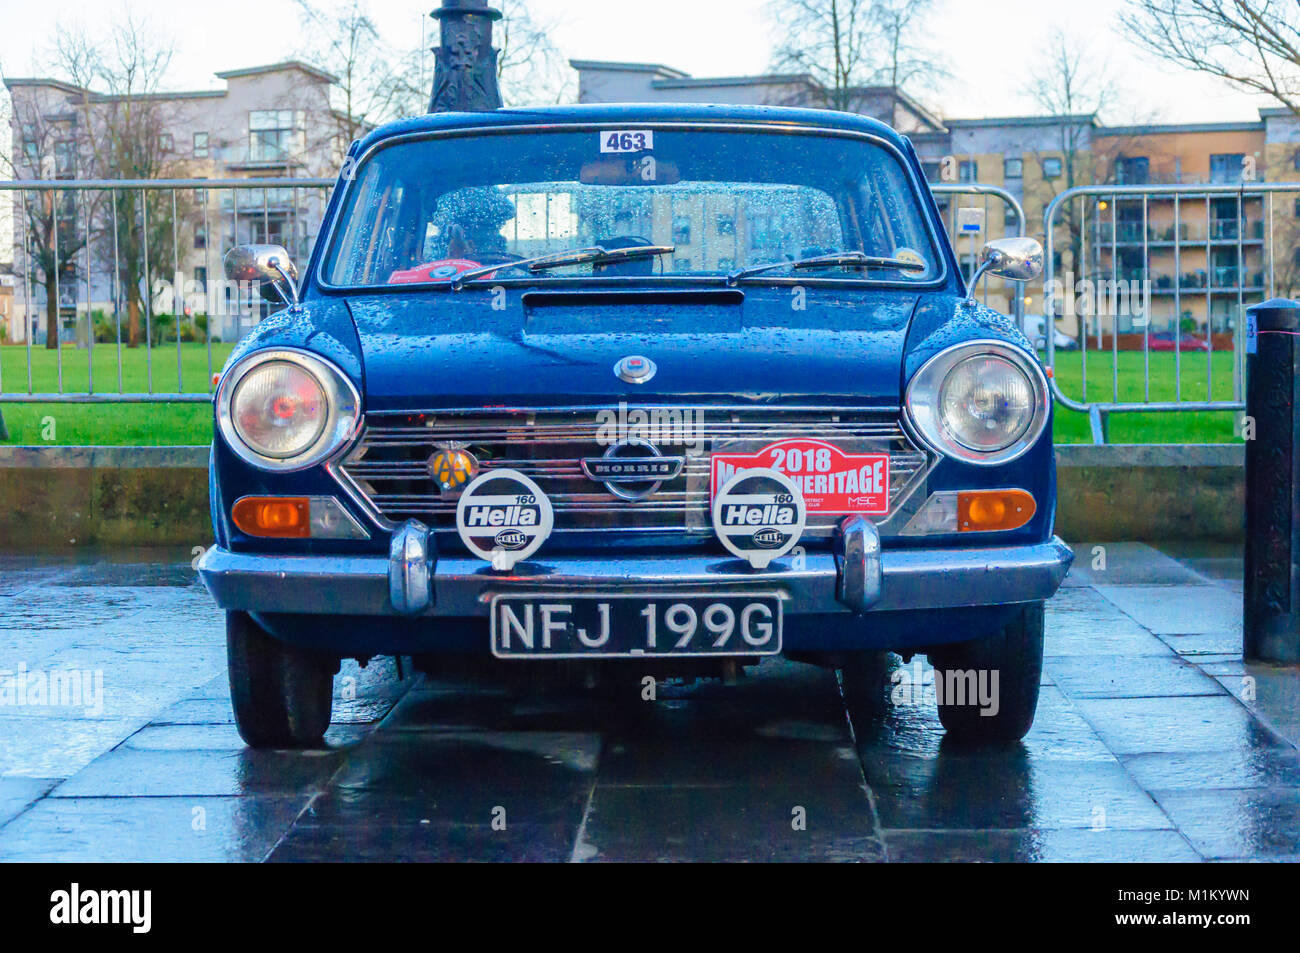 Paisley, Scotland, UK. 31st January 2018: A front view of a blue Morris car. The Monte Carlo Rally starts at Paisley Abbey. This year sees the 21st  Historique event and the 3rd Classique event. Both events are staged by the Automobile Club de Monaco  and take place on open public roads. The distance to Monte Carlo is 1270 miles. Credit: Skully/Alamy Live News Stock Photo